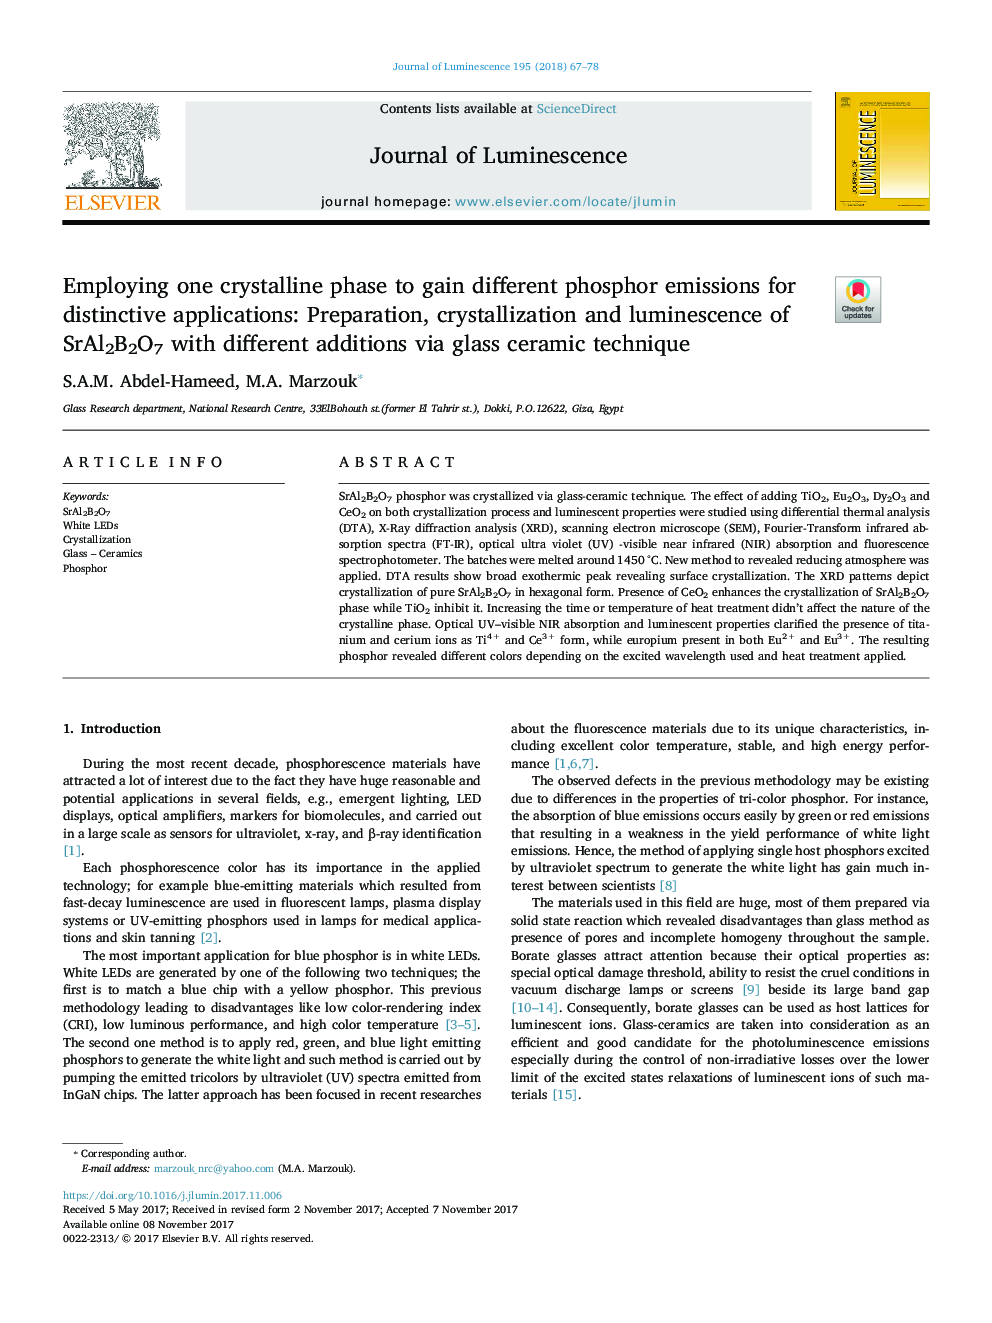 Employing one crystalline phase to gain different phosphor emissions for distinctive applications: Preparation, crystallization and luminescence of SrAl2B2O7 with different additions via glass ceramic technique